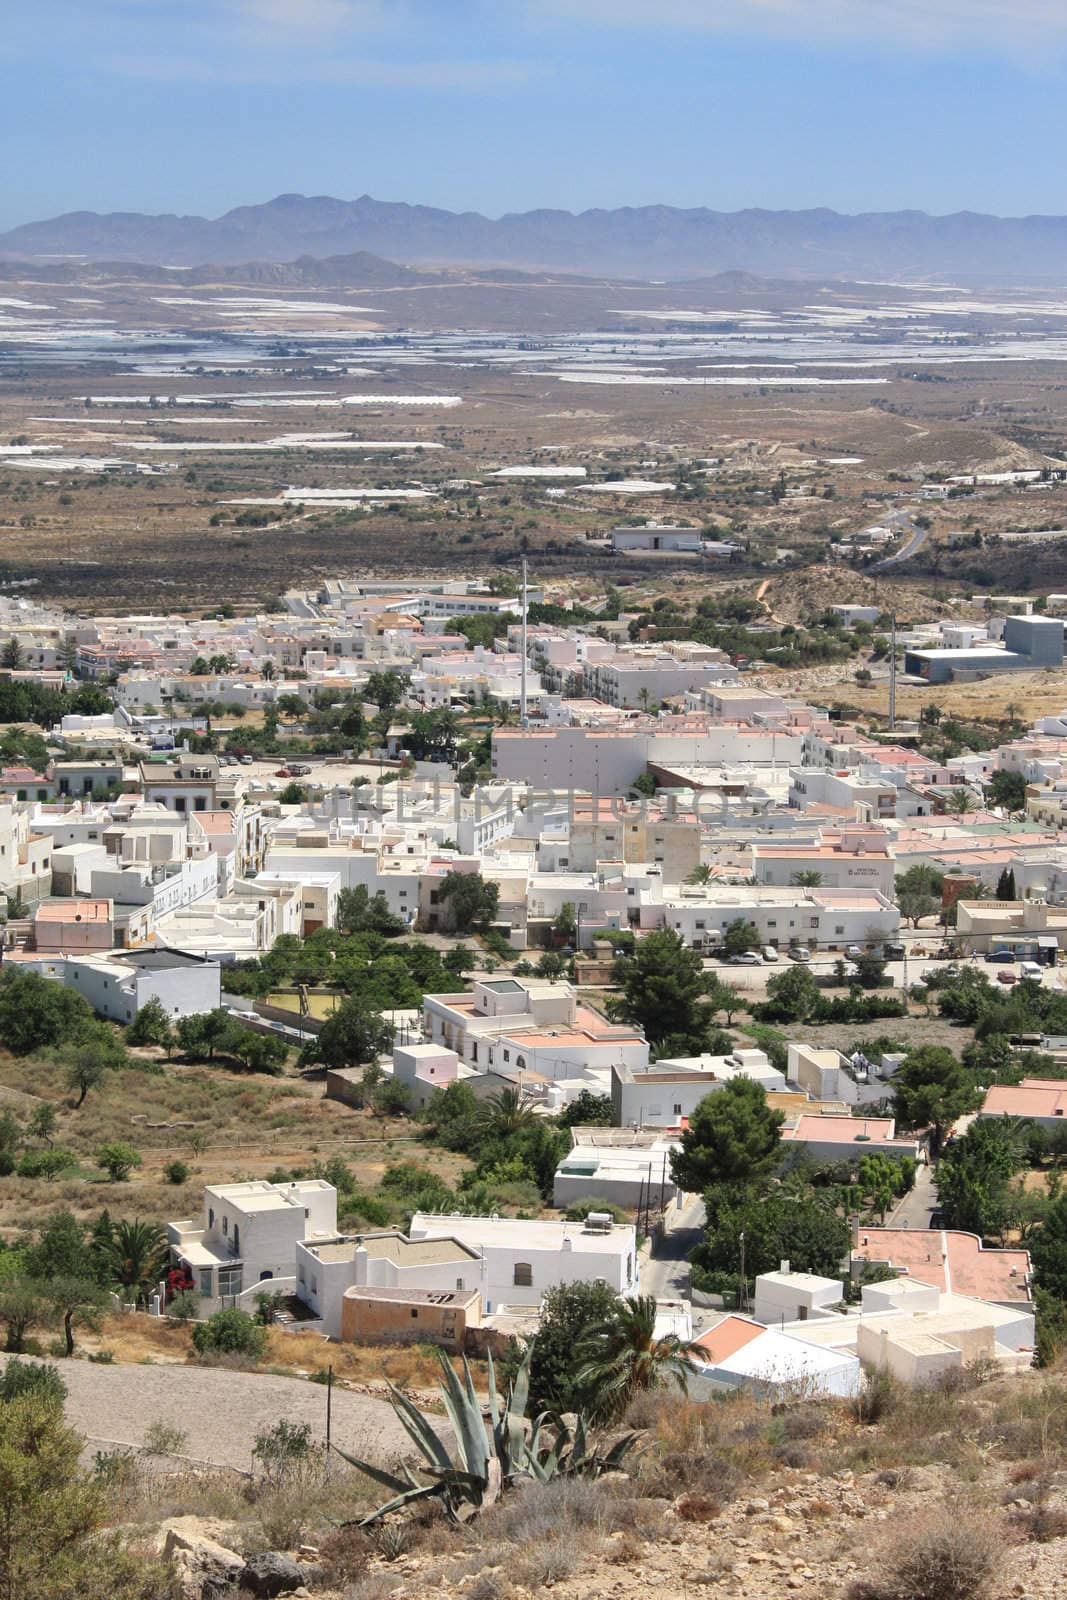 Aerial view of Nijar, a typical Andalusian village in the province of Almeria, Spain.